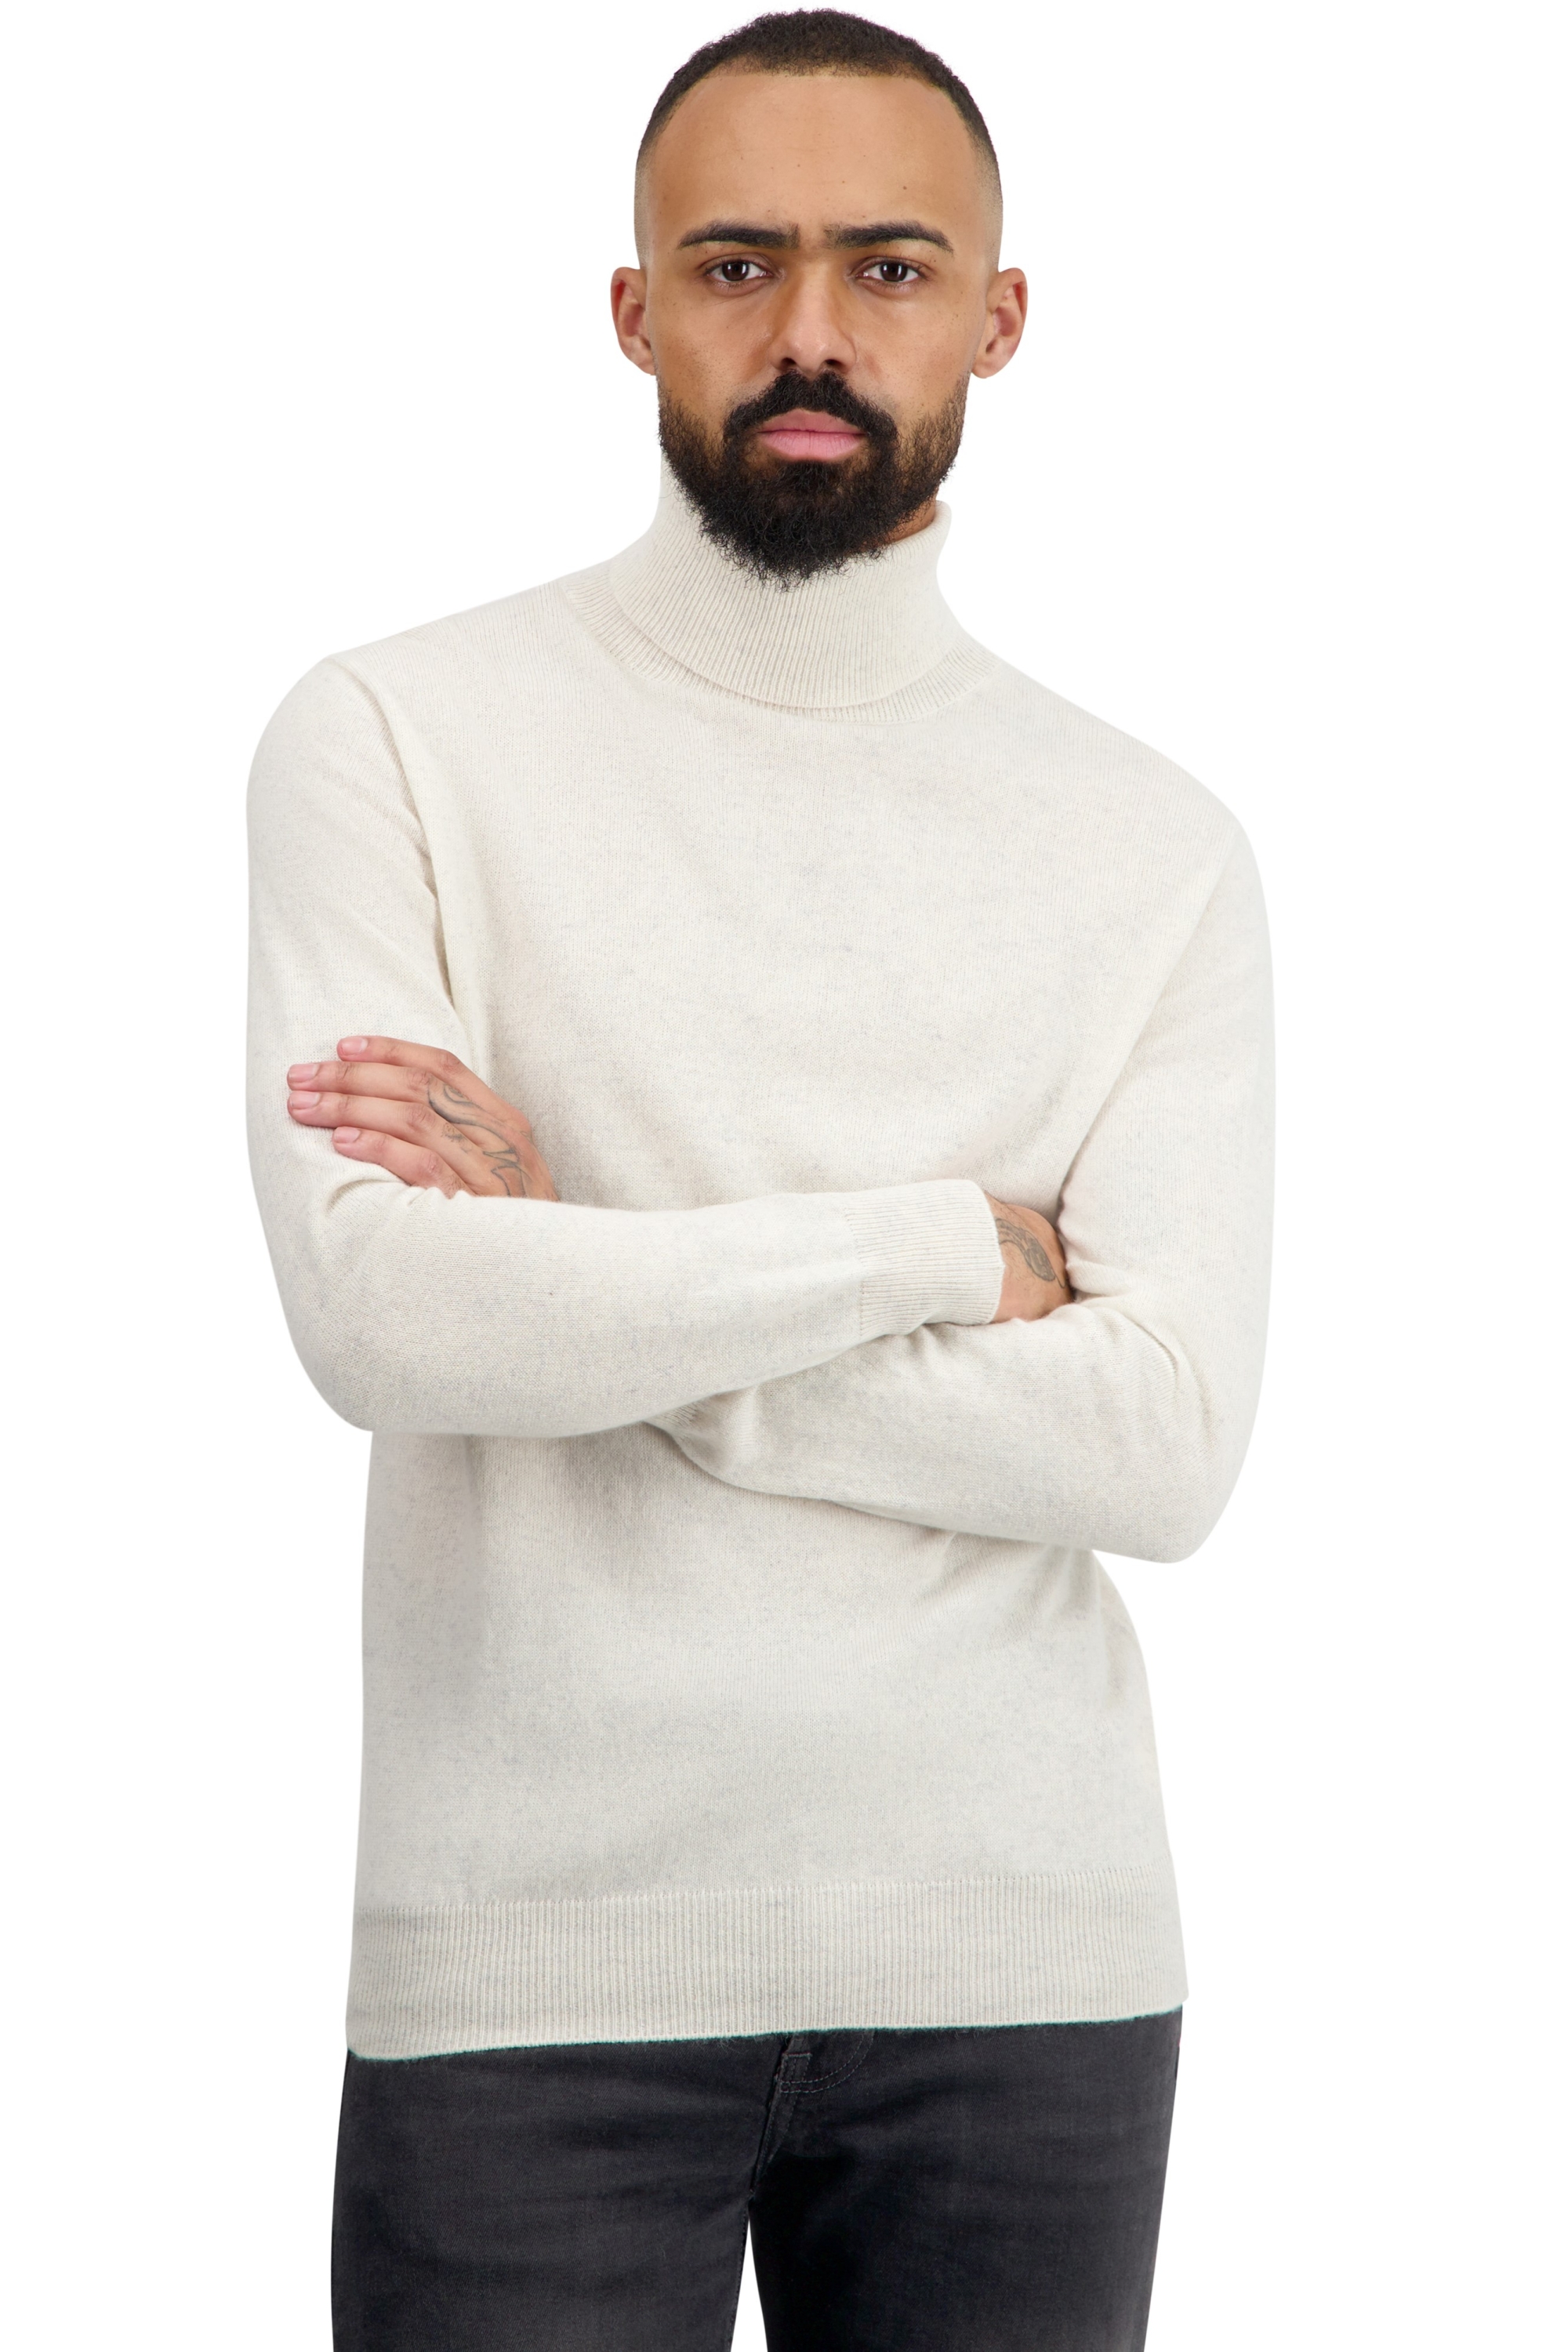 Cashmere men basic sweaters at low prices tarry first phantom m